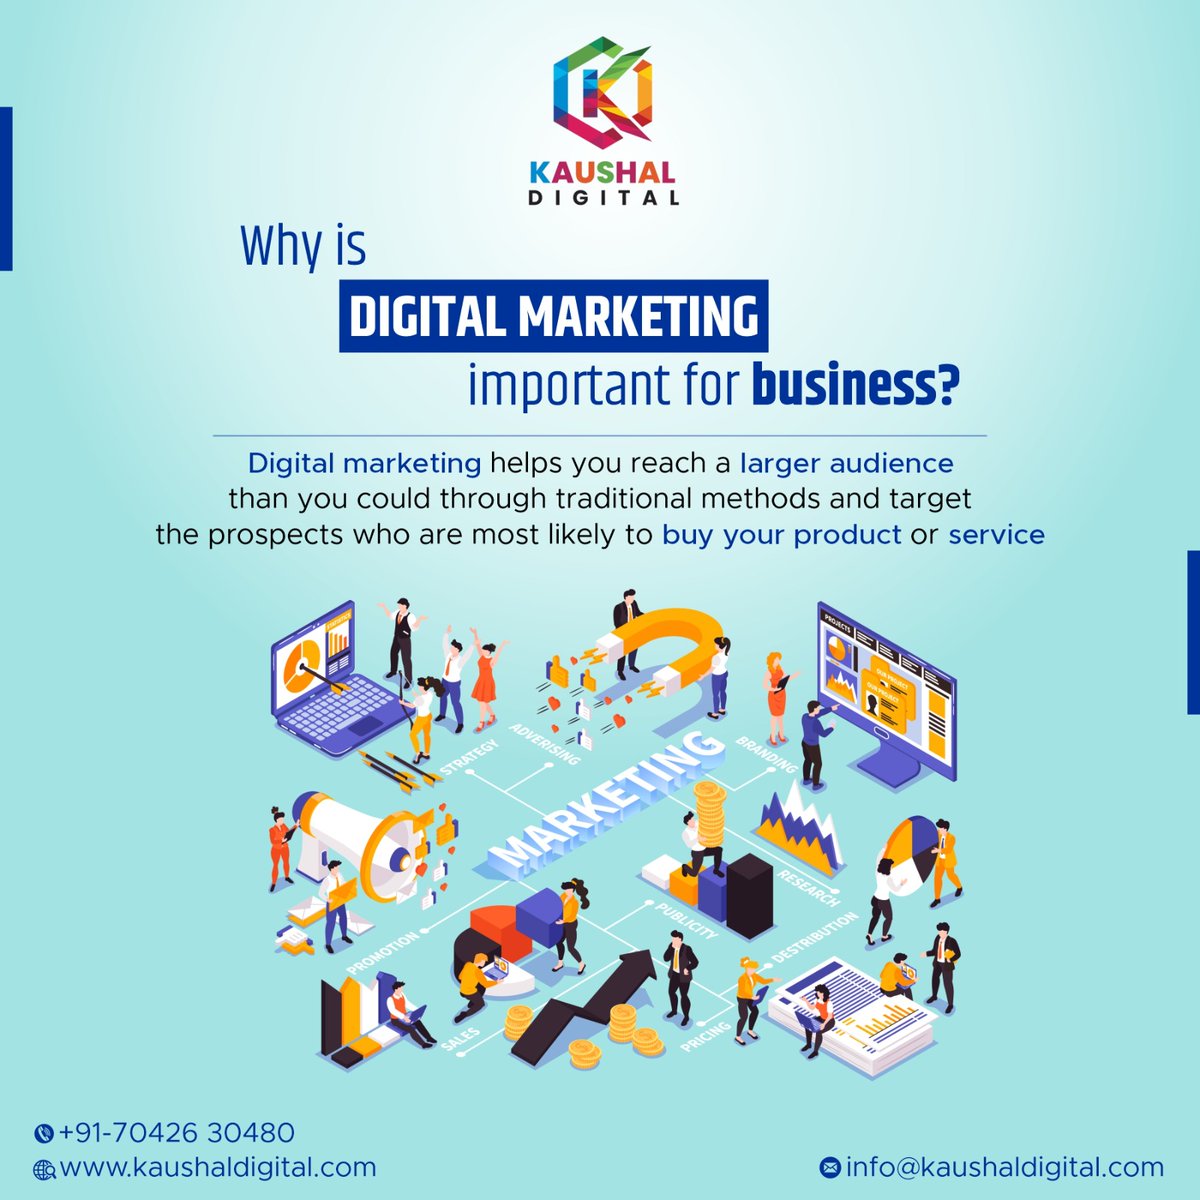 𝗗𝗜𝗚𝗜𝗧𝗔𝗟 𝗠𝗔𝗥𝗞𝗘𝗧𝗜𝗡𝗚 𝐈𝐌𝐏𝐎𝐑𝐓𝐀𝐍𝐓 𝐅𝐎𝐑 𝐁𝐔𝐒𝐈𝐍𝐄𝐒𝐒
Digital marketing helps you reach a larger audience than you could through traditional methods.

Contact:- +7042630480
Visit:- kaushaldigital.com
#Kaushaldigital #designconsultants #graphicdesigning